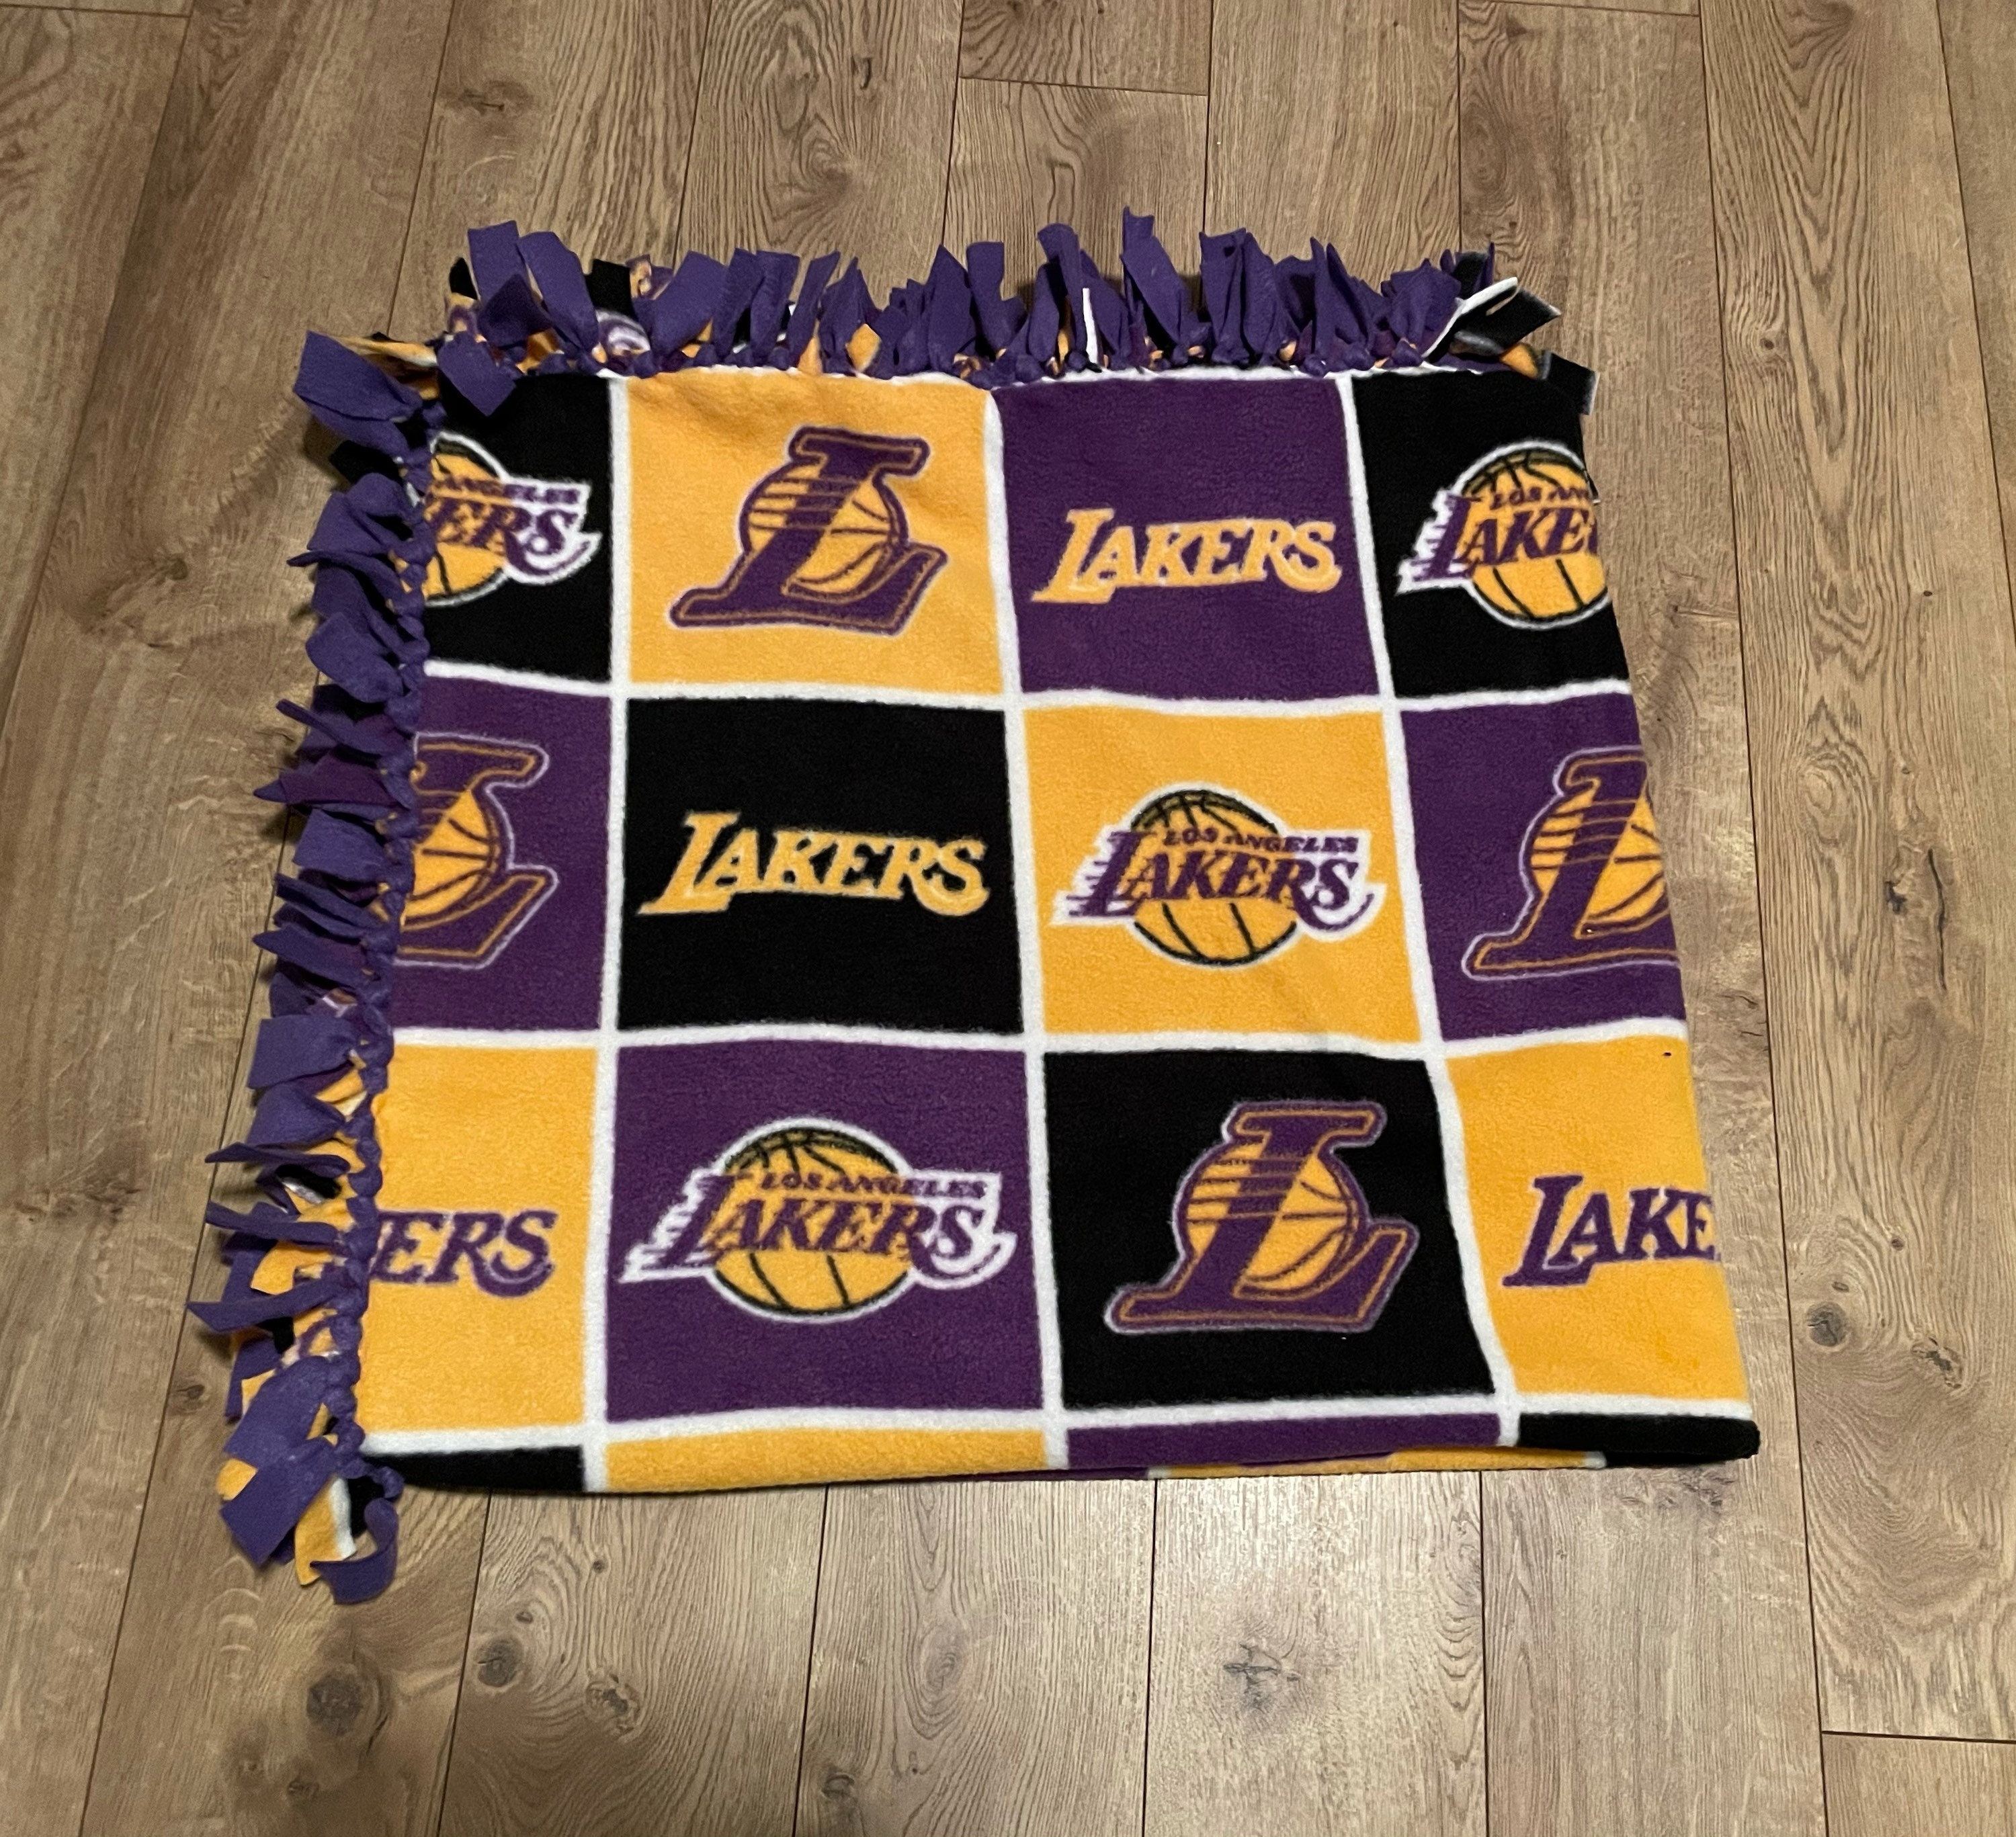 Los Angeles Lakers Personalized Jersey Silk Touch Fleece Blanket, Purple, Size NA, Rally House